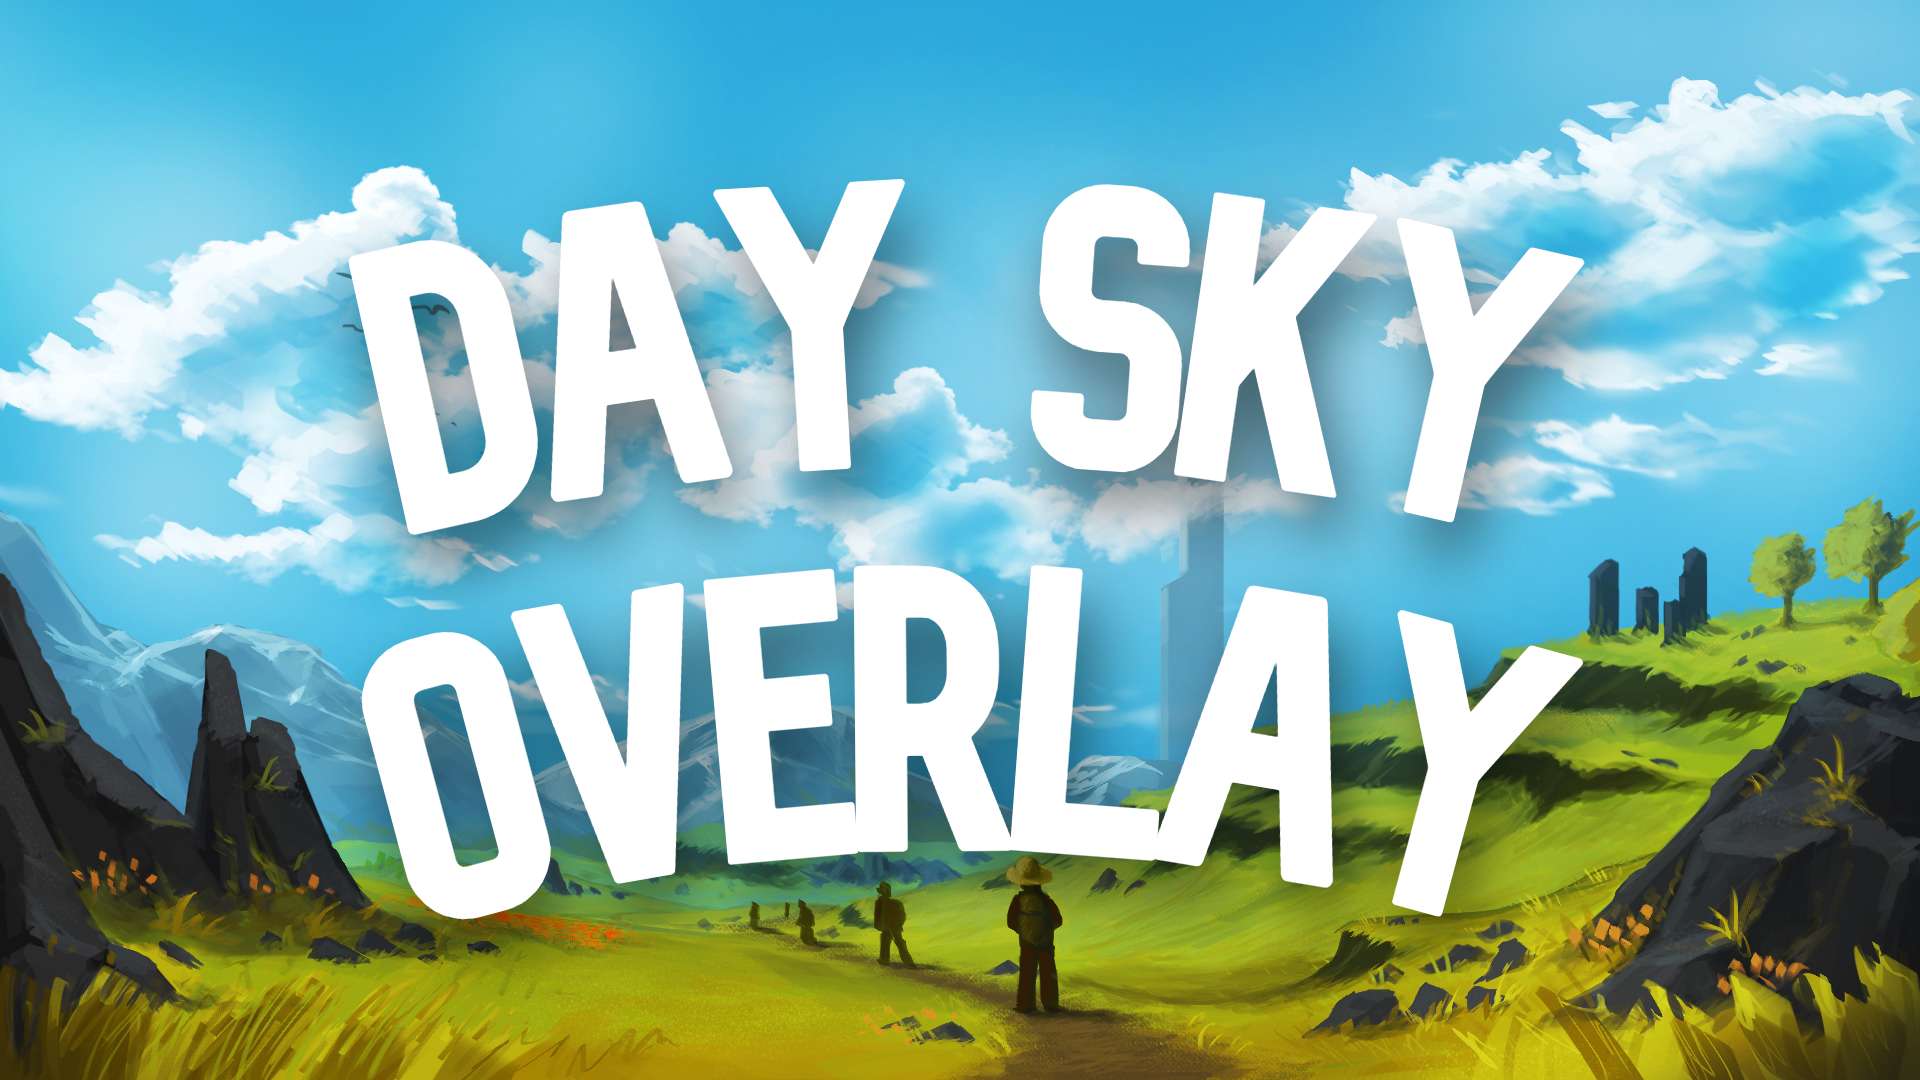 Day Sky Overlay #15 16x by rh56 on PvPRP